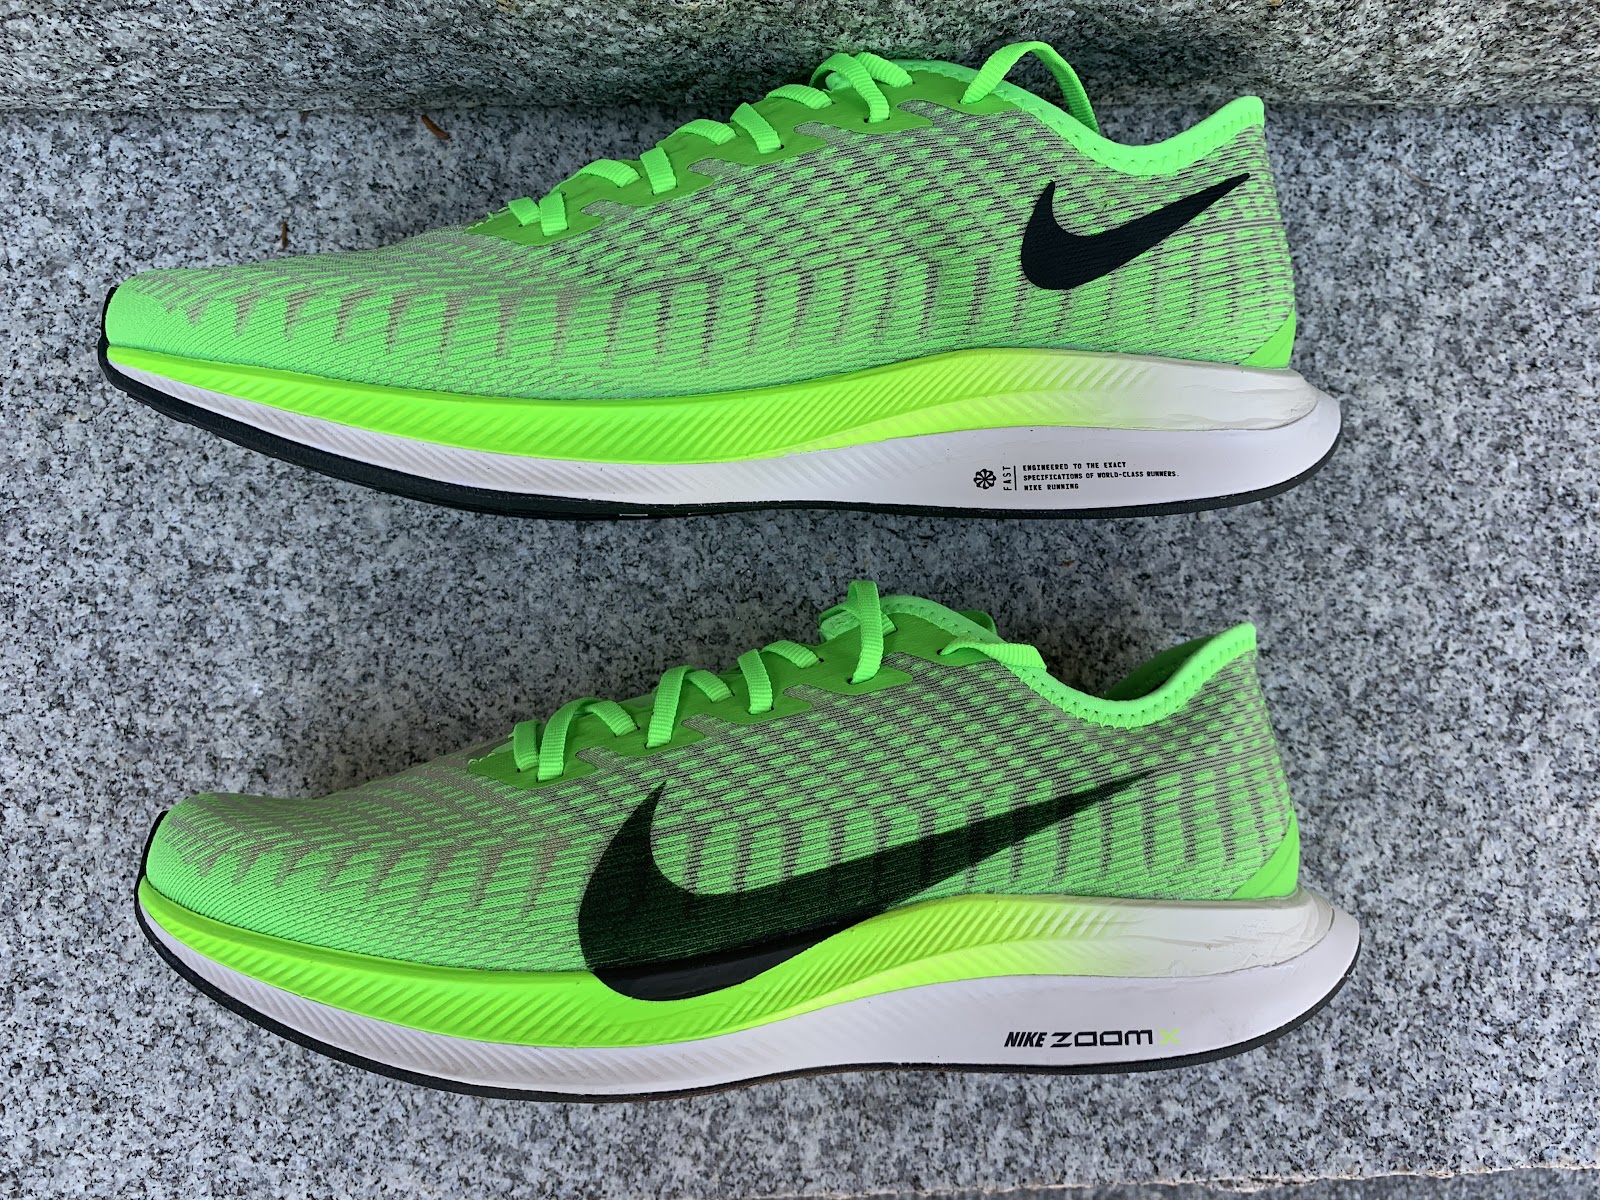 Road Trail Run: NIke Zoom Pegasus 36 Turbo 2 Review: More For Real Turbo  and a Superb Upper